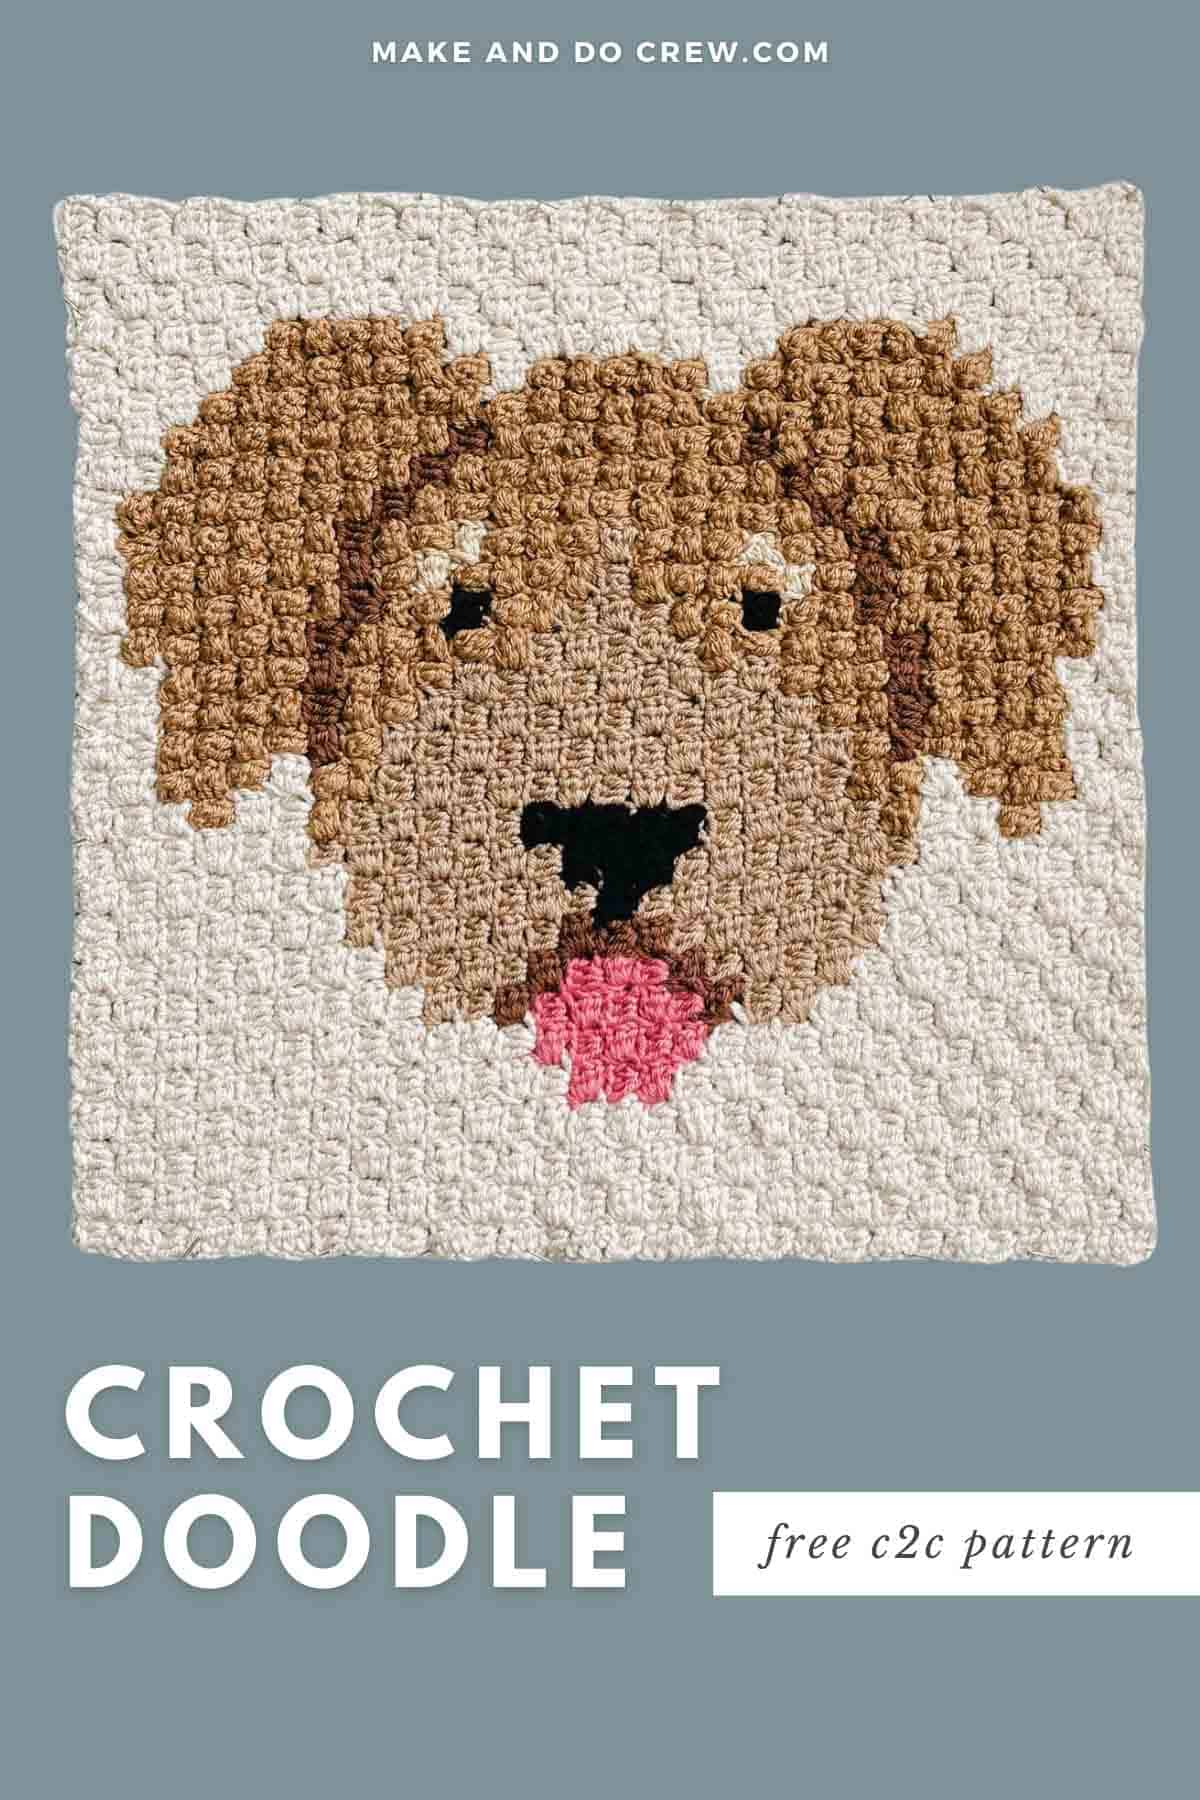 This image shows a free crochet pattern for a doodle dog corner to corner crochet square.